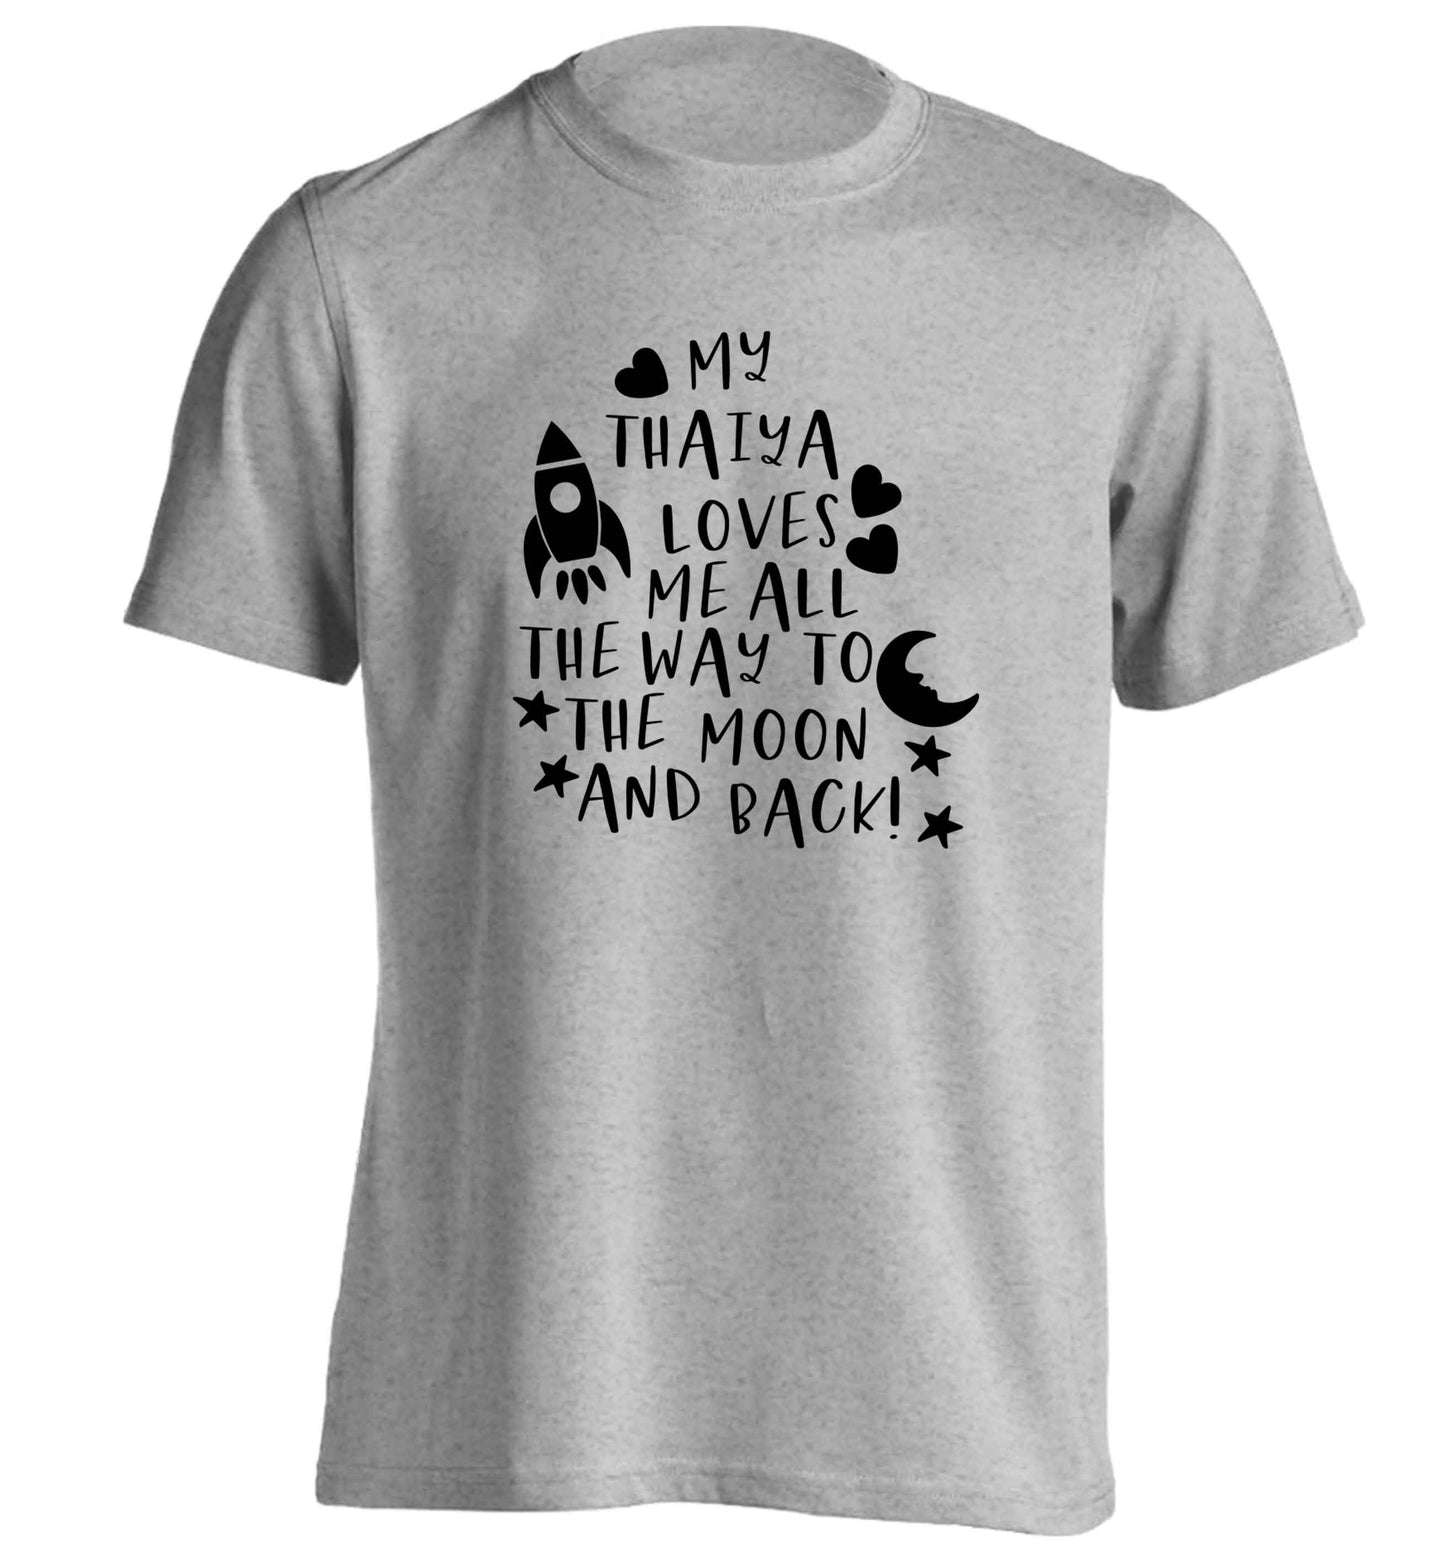 My thaiya loves me all the way to the moon and back adults unisex grey Tshirt 2XL